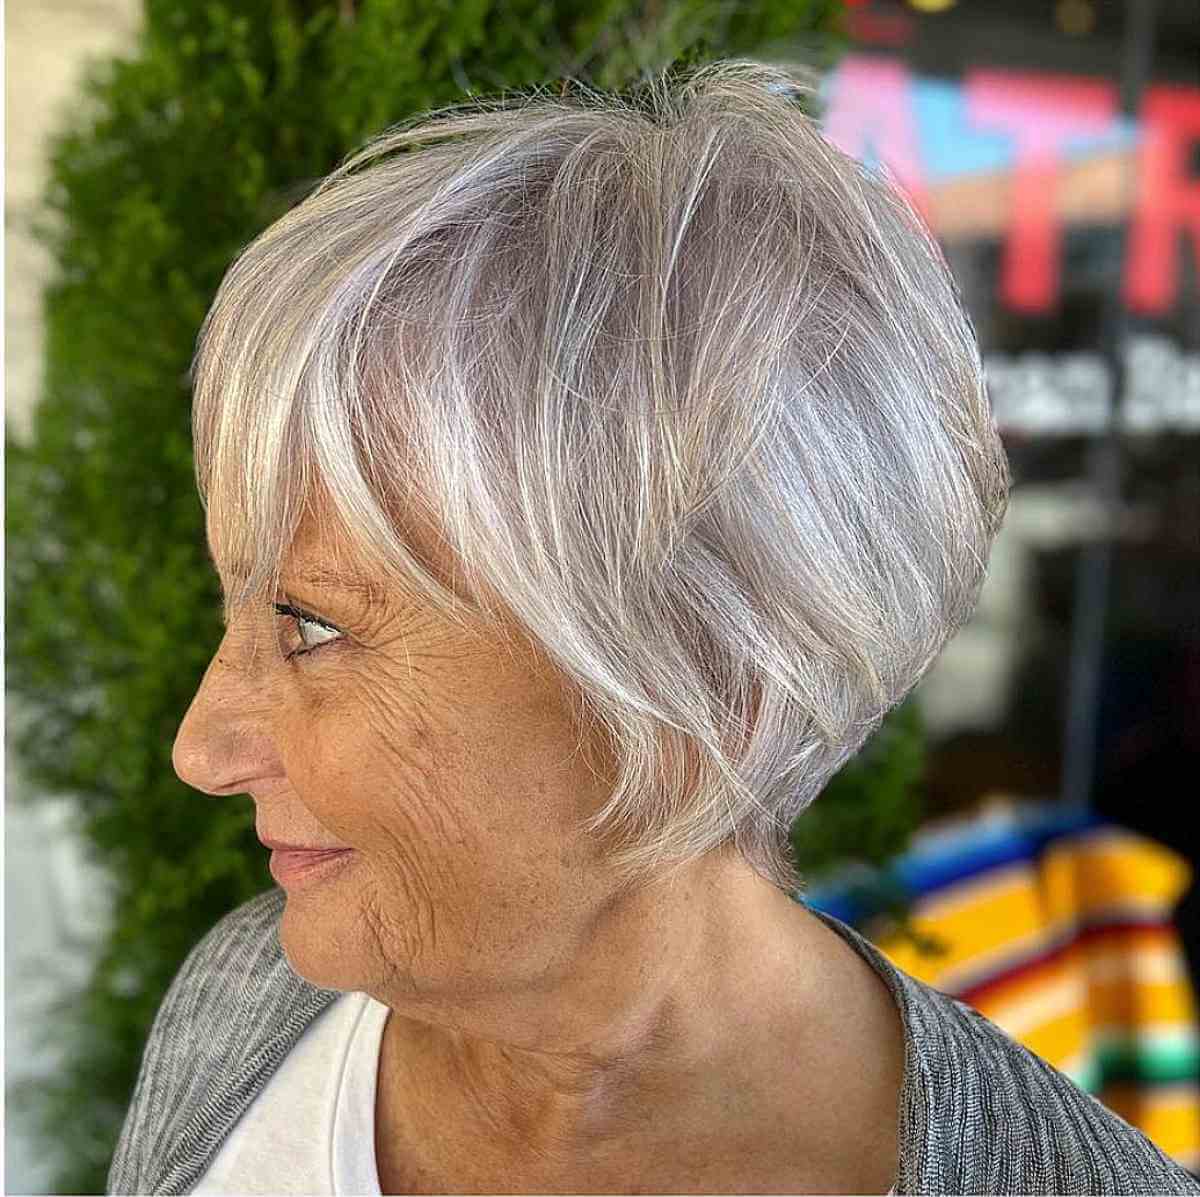 Pixie Bob with Soft Bangs on Thinning Hair Women in Their Sixties